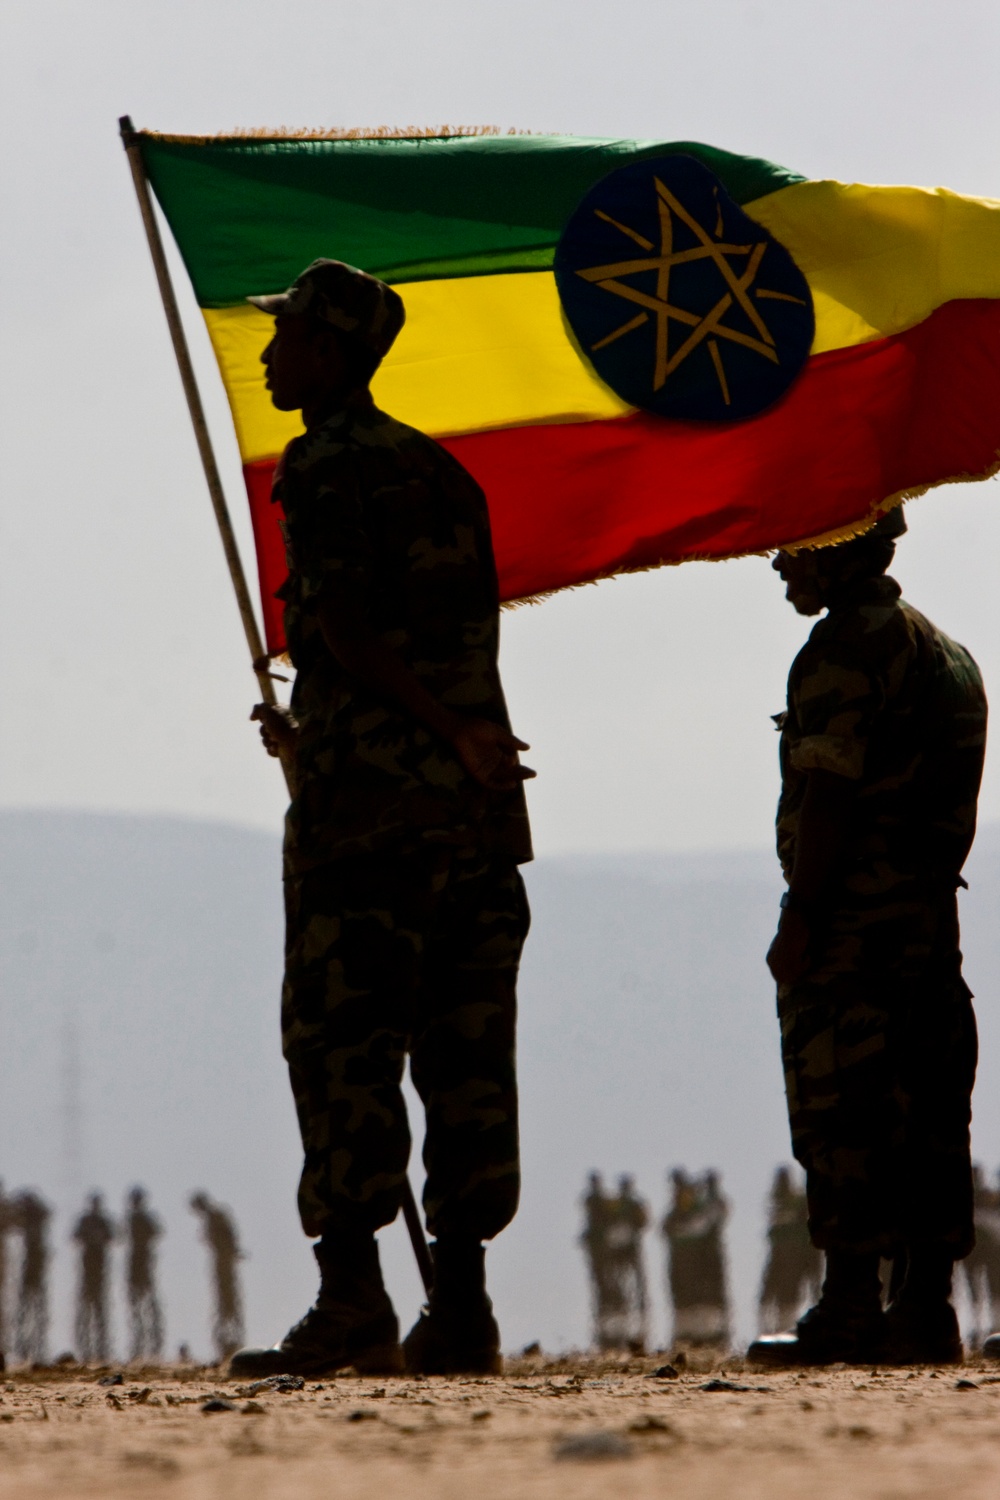 Eastern Africa Standby Force Reaches Milestones at Conclusion of Exercise